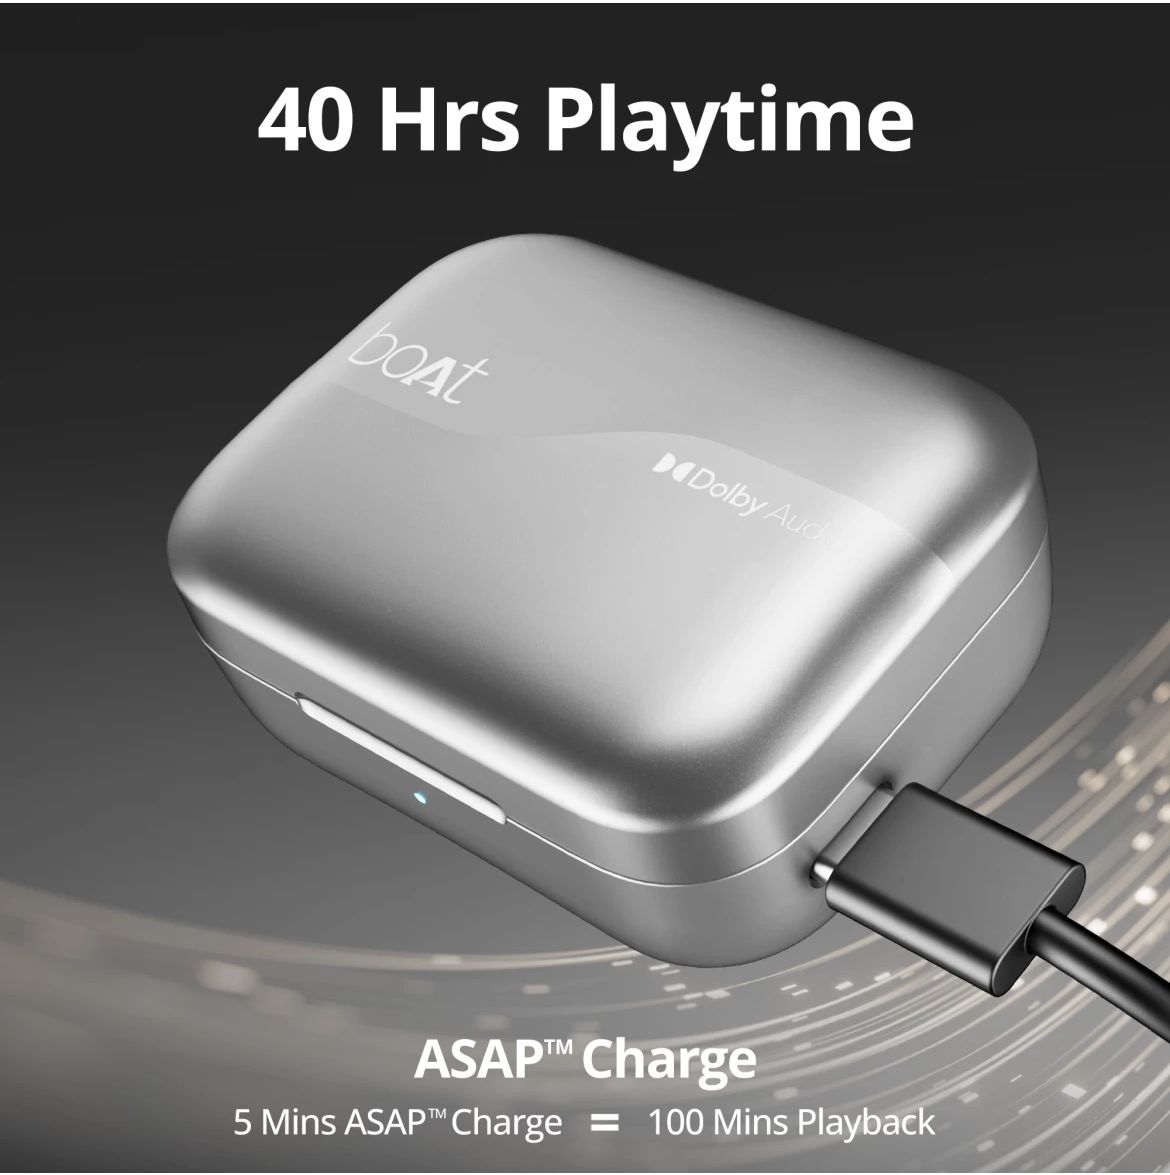 ASAP Charge technology allows the Airdopes 800 to deliver up to 100 minutes of playback with just a 5-minute charge